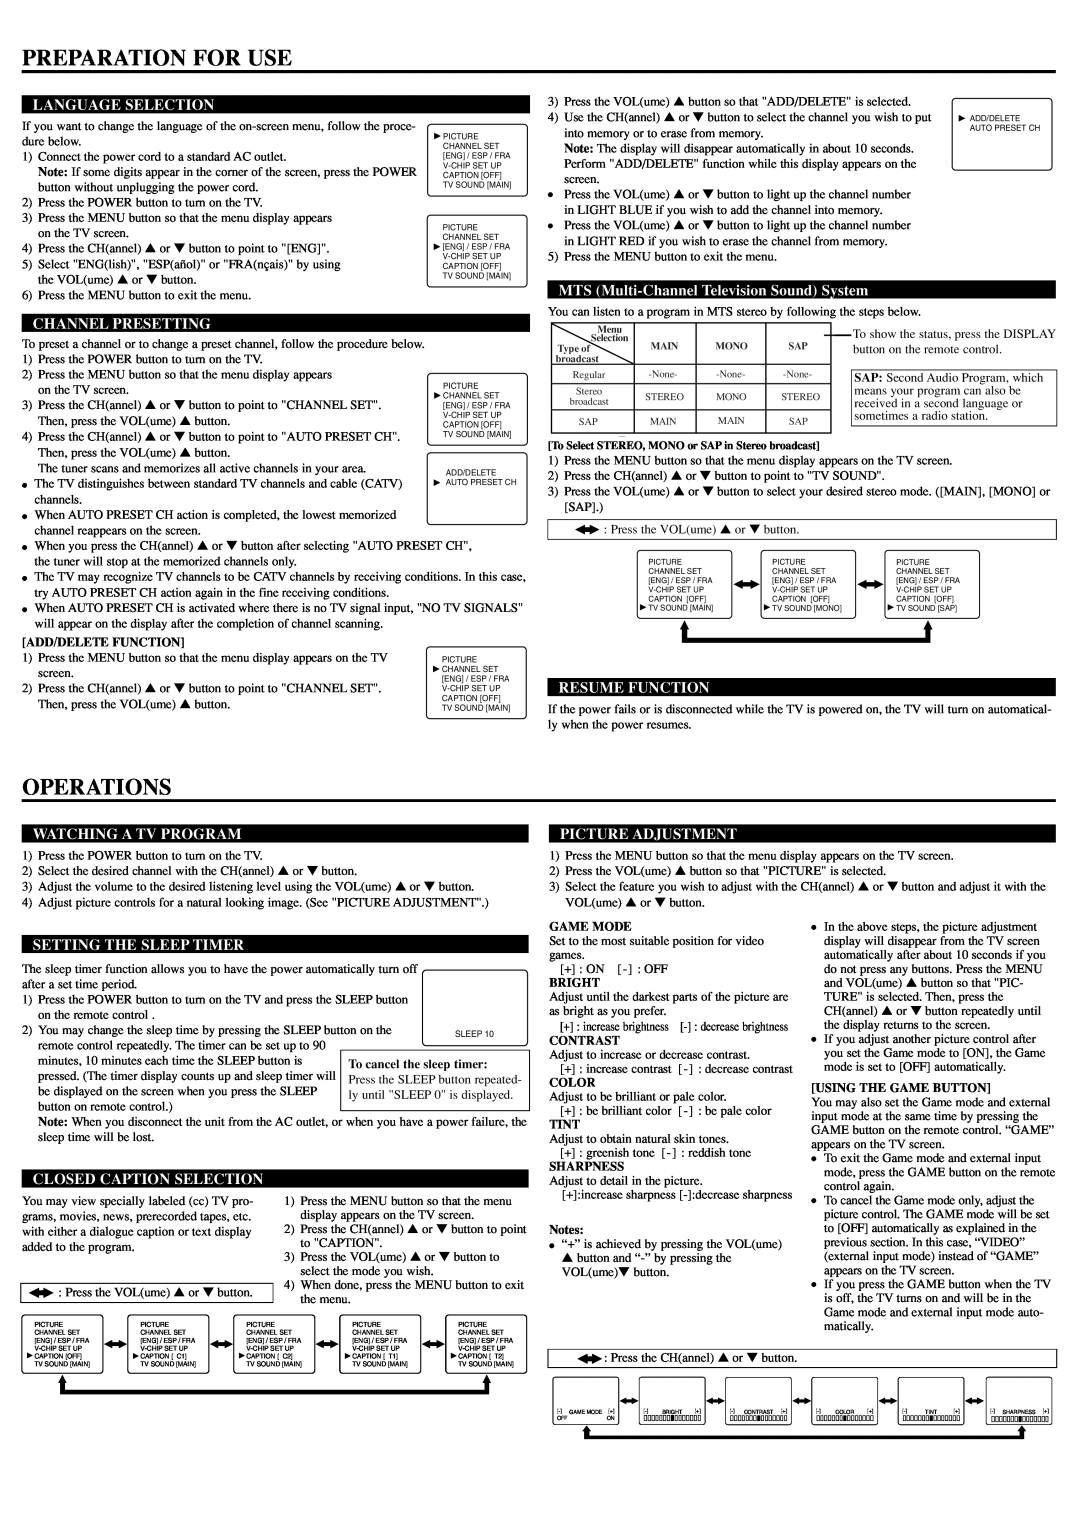 Sylvania RSDCT2704R Preparation For Use, Operations, Language Selection, Channel Presetting, Resume Function, Game Mode 